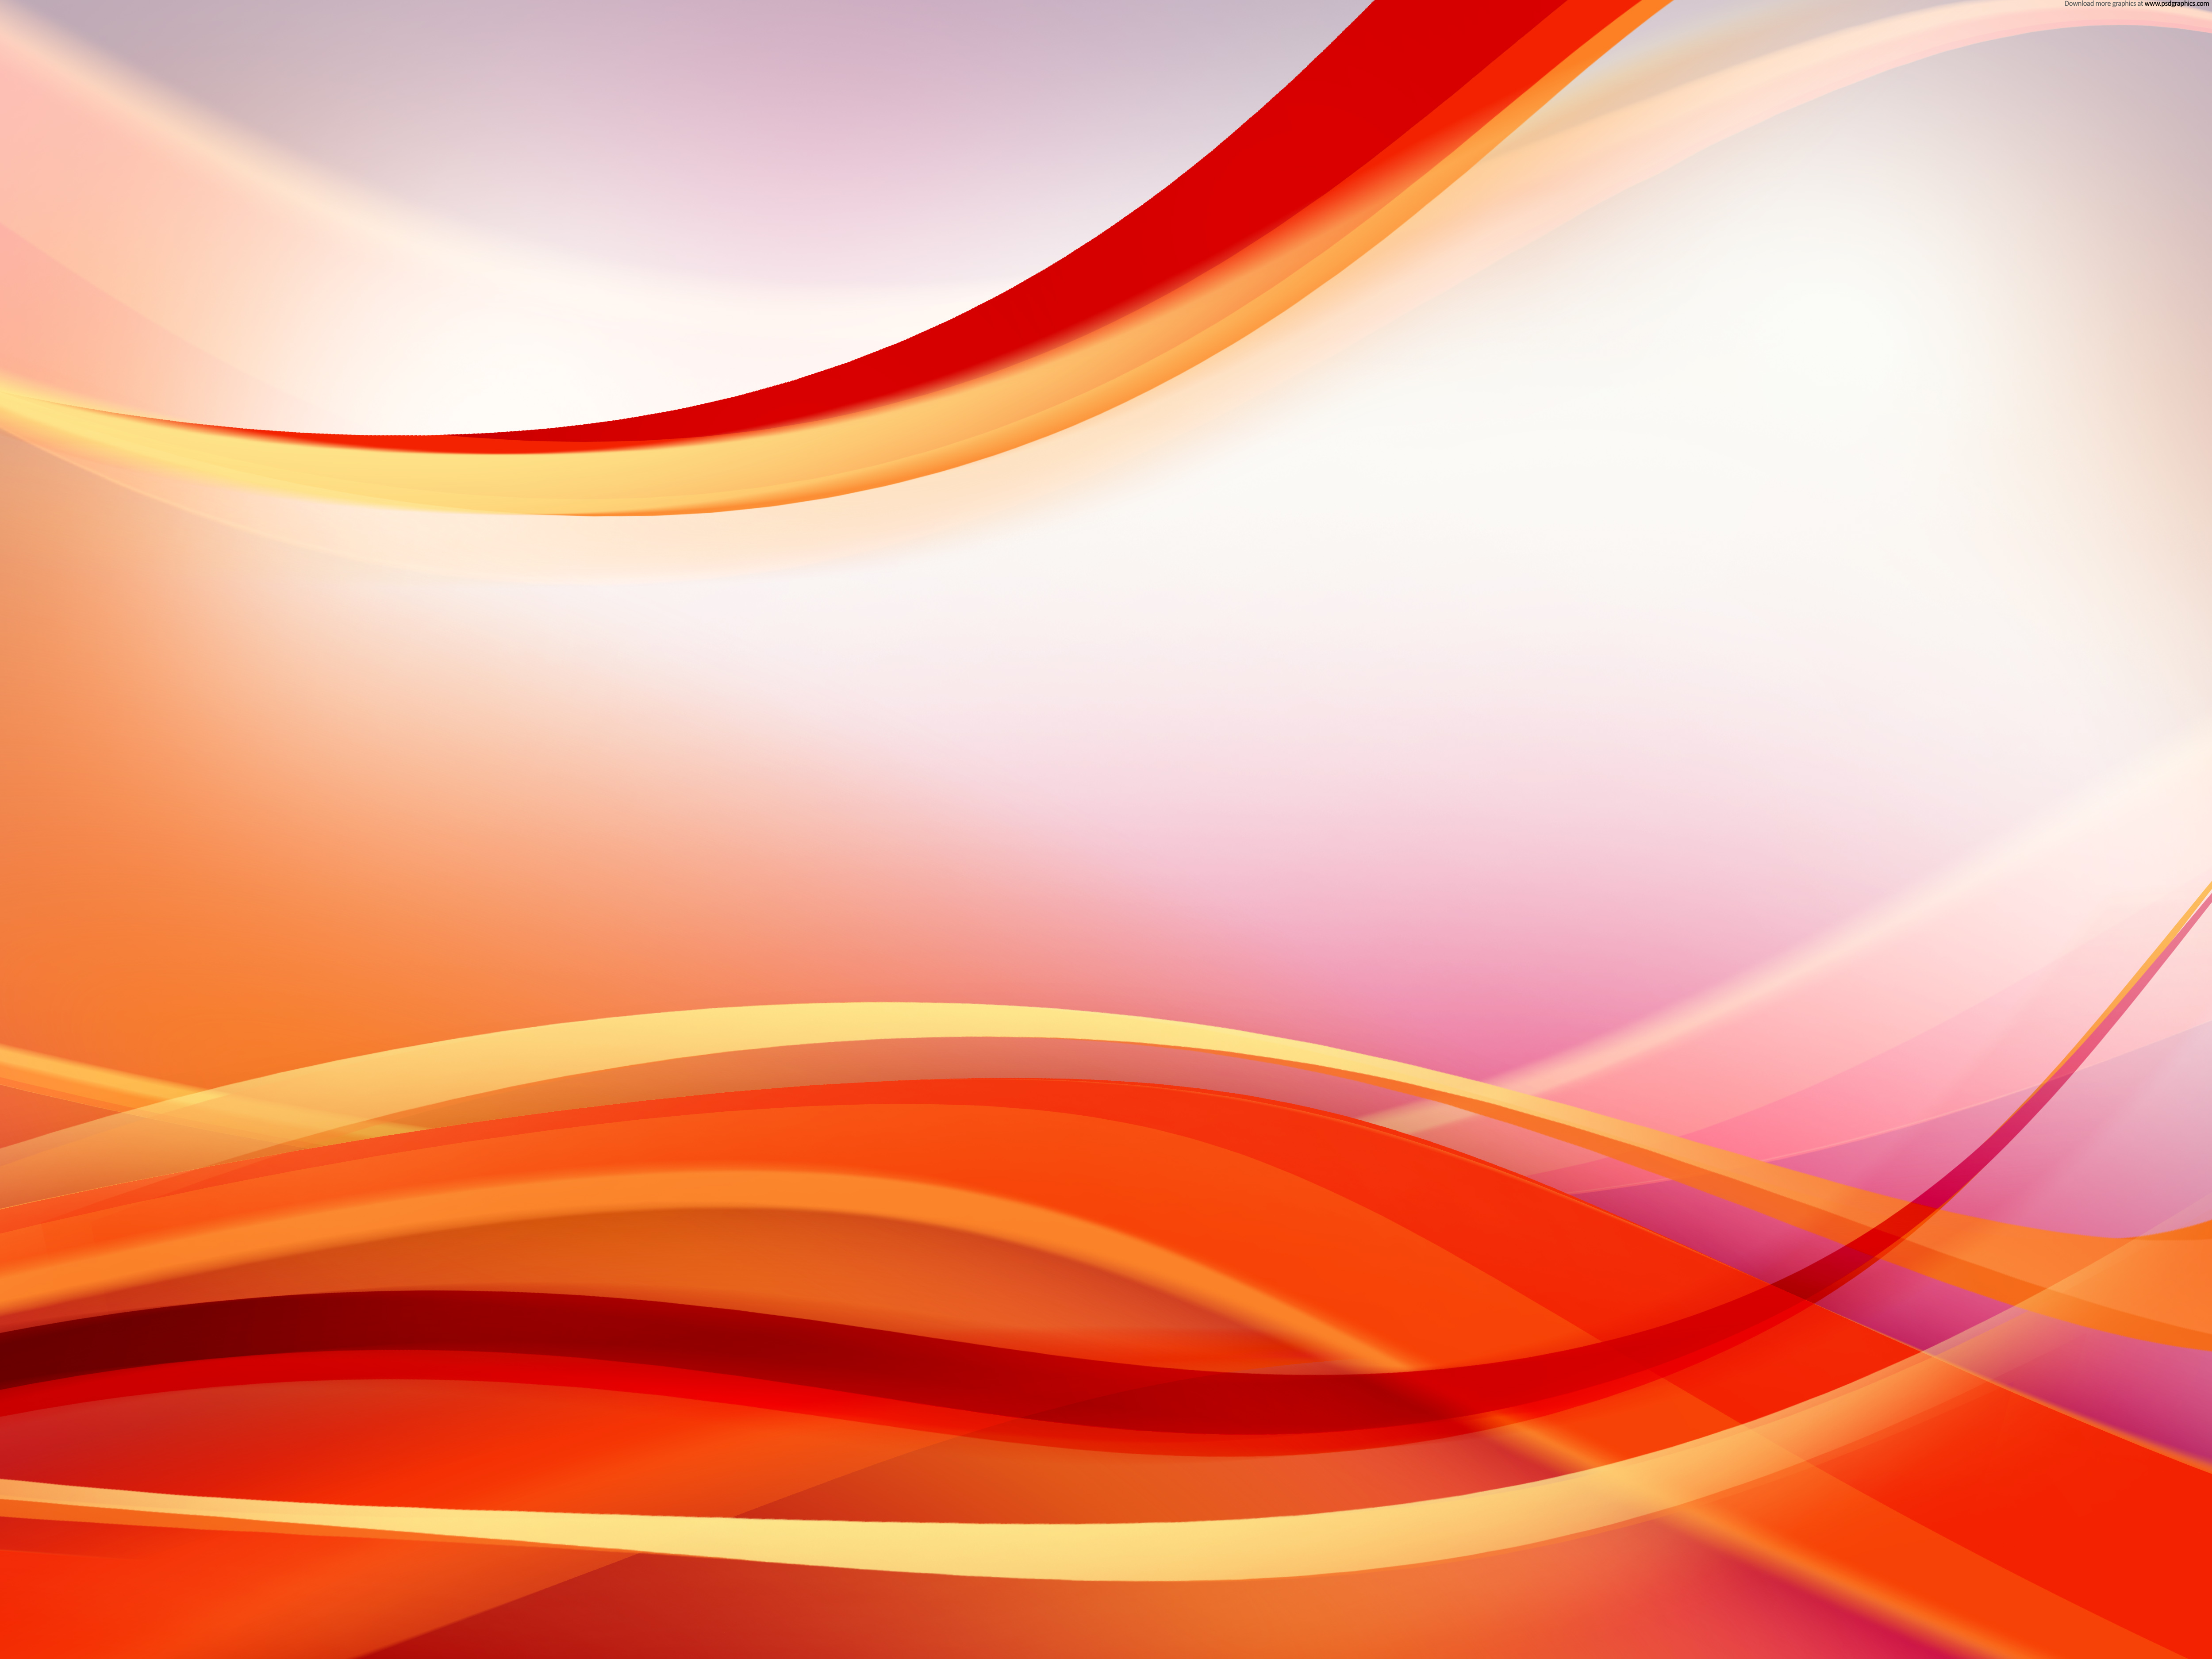 Red And Yellow Flowing Background Psdgraphics